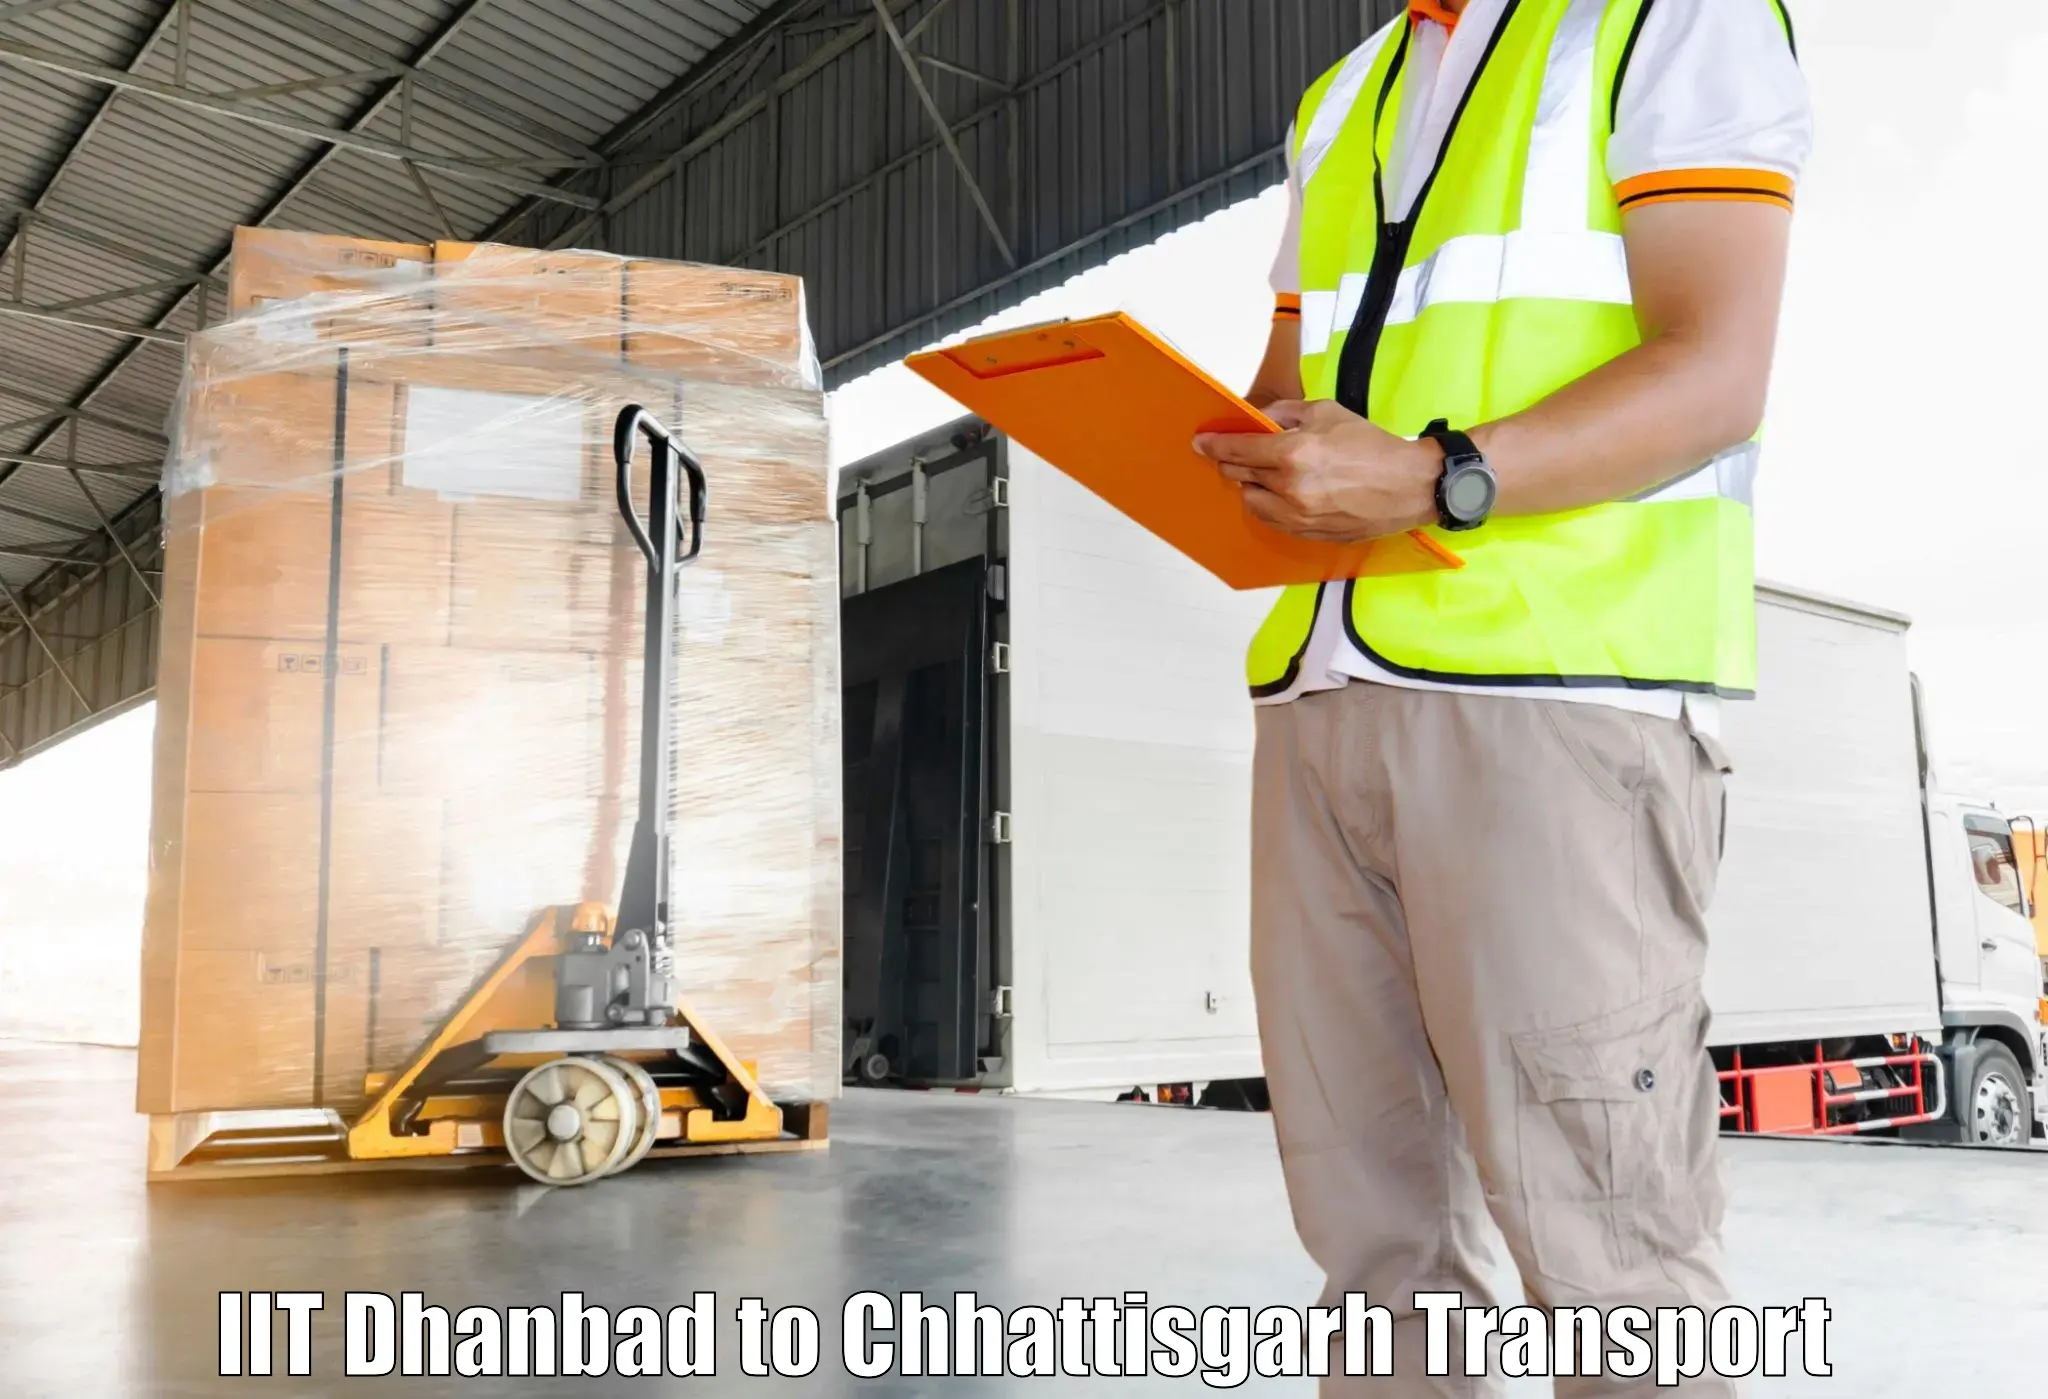 Air cargo transport services IIT Dhanbad to Bhilai